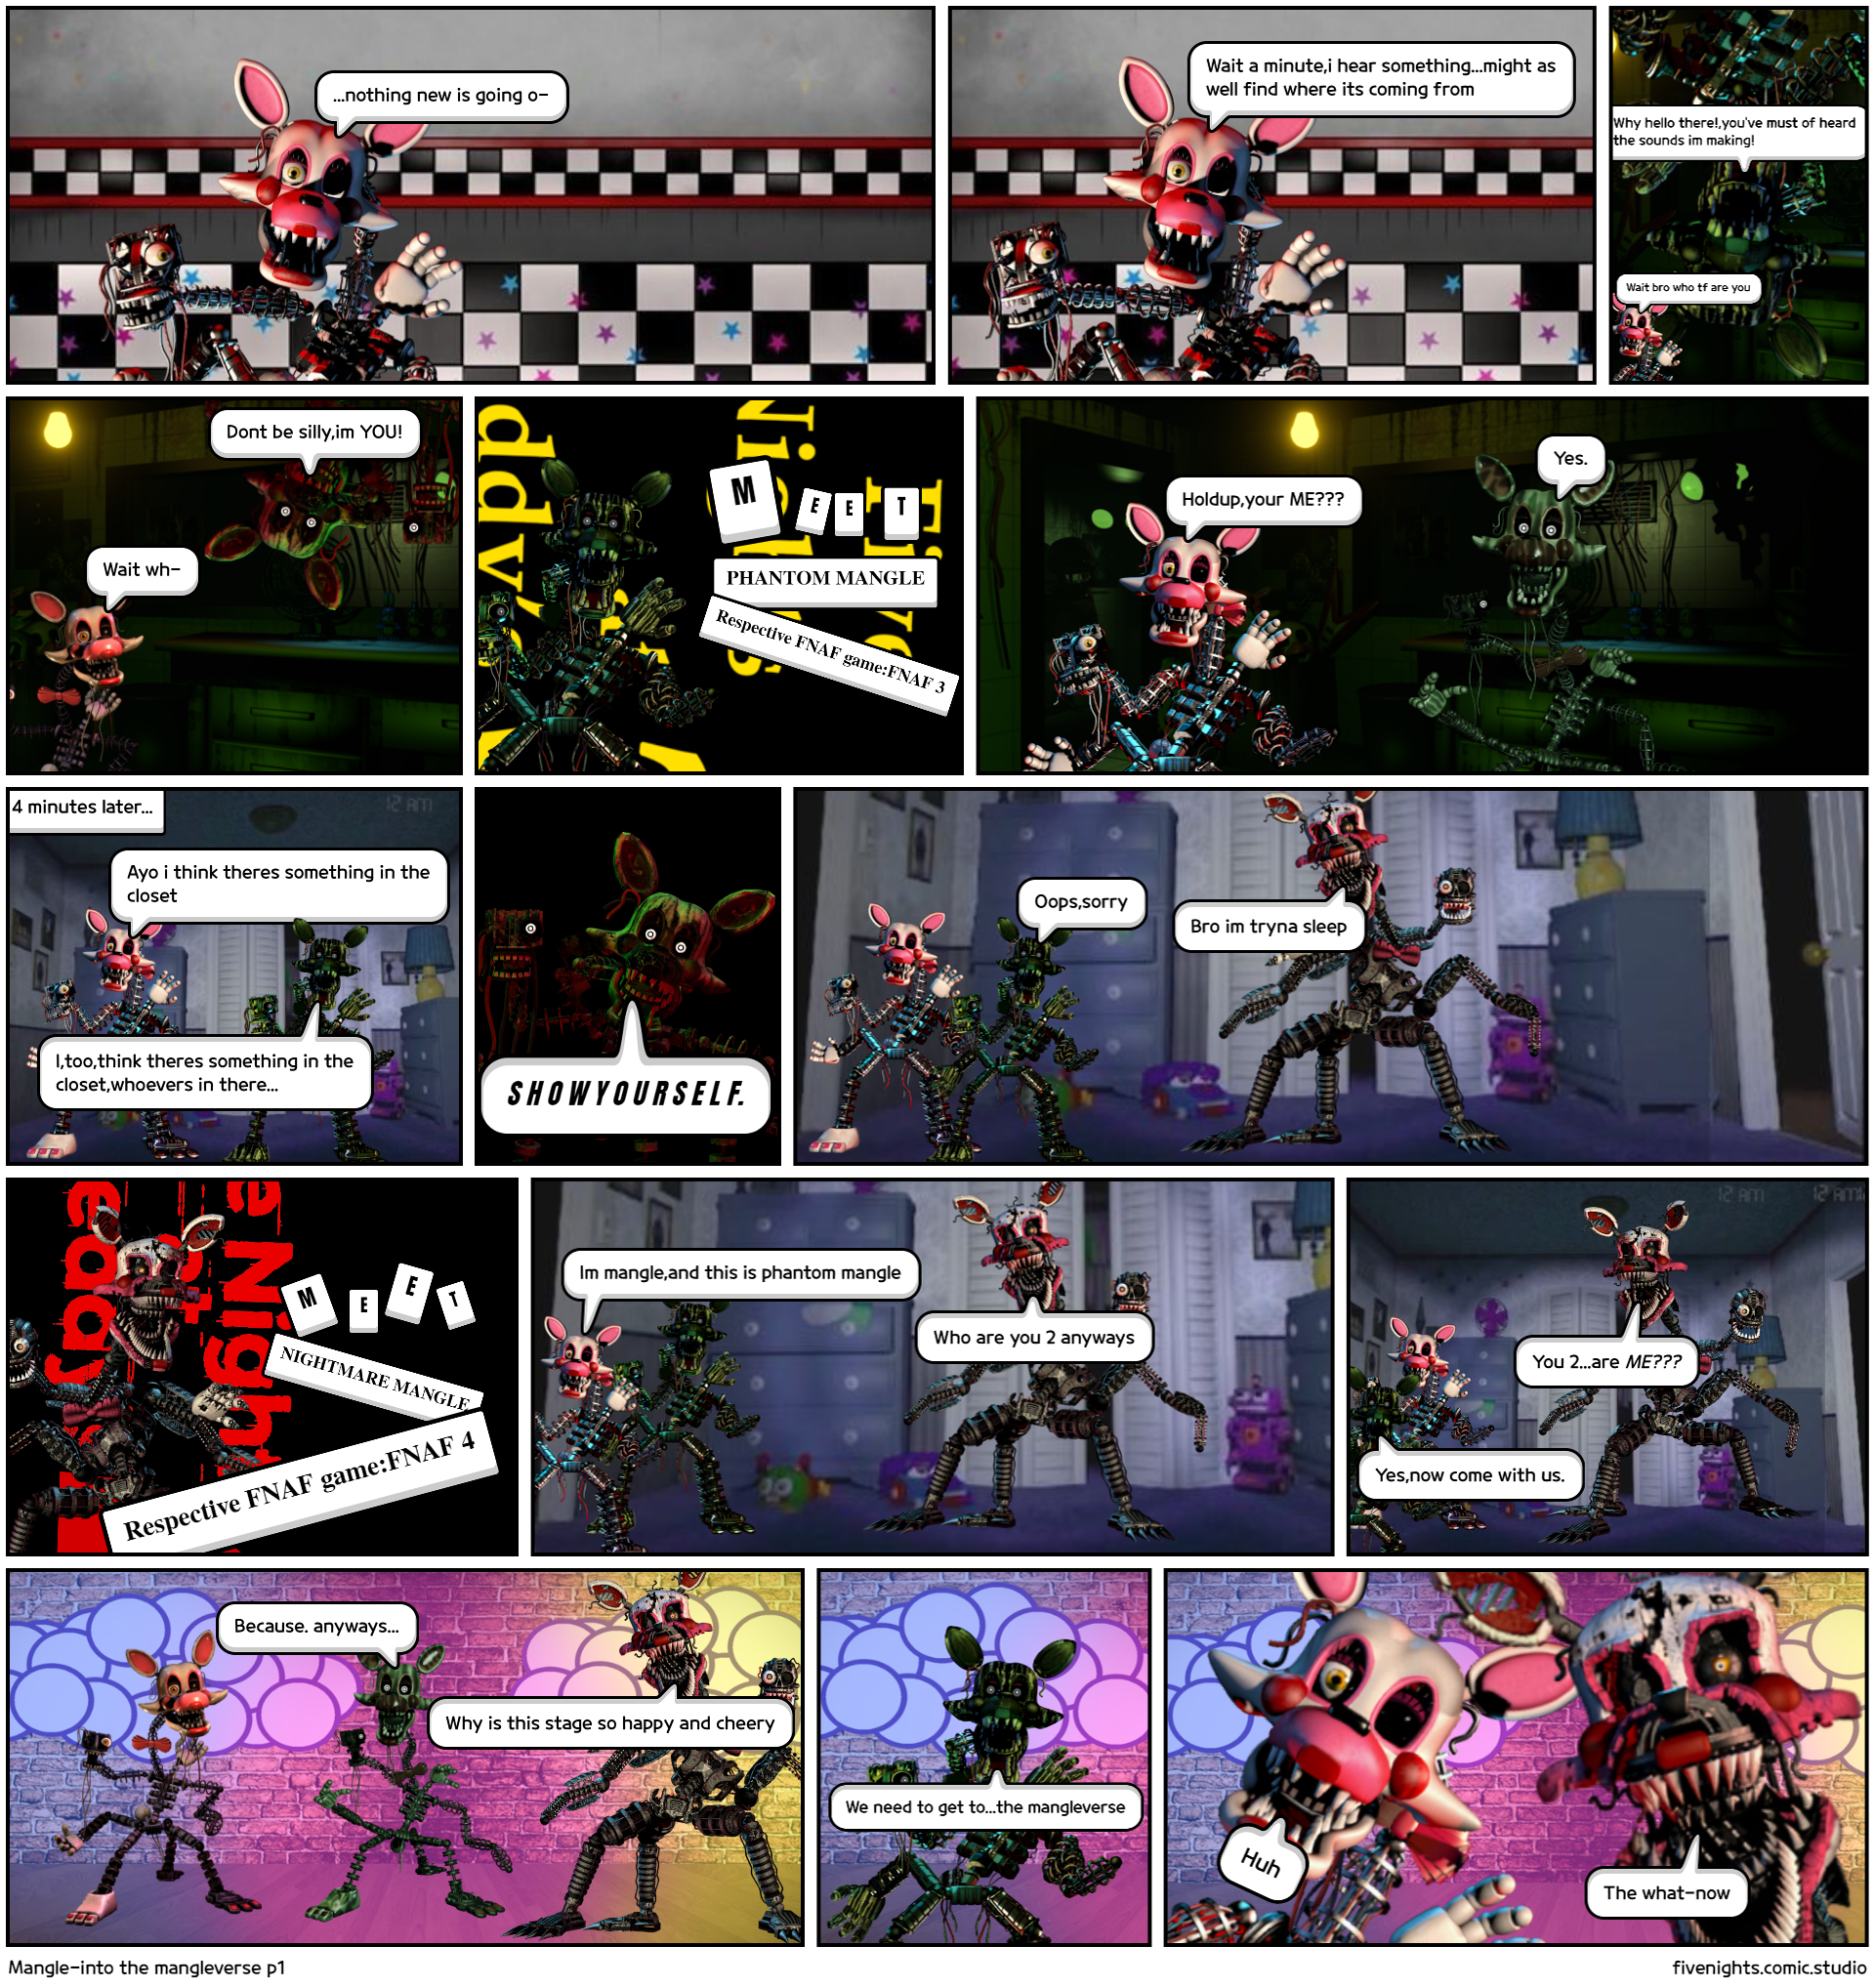 Mangle-into the mangleverse p1